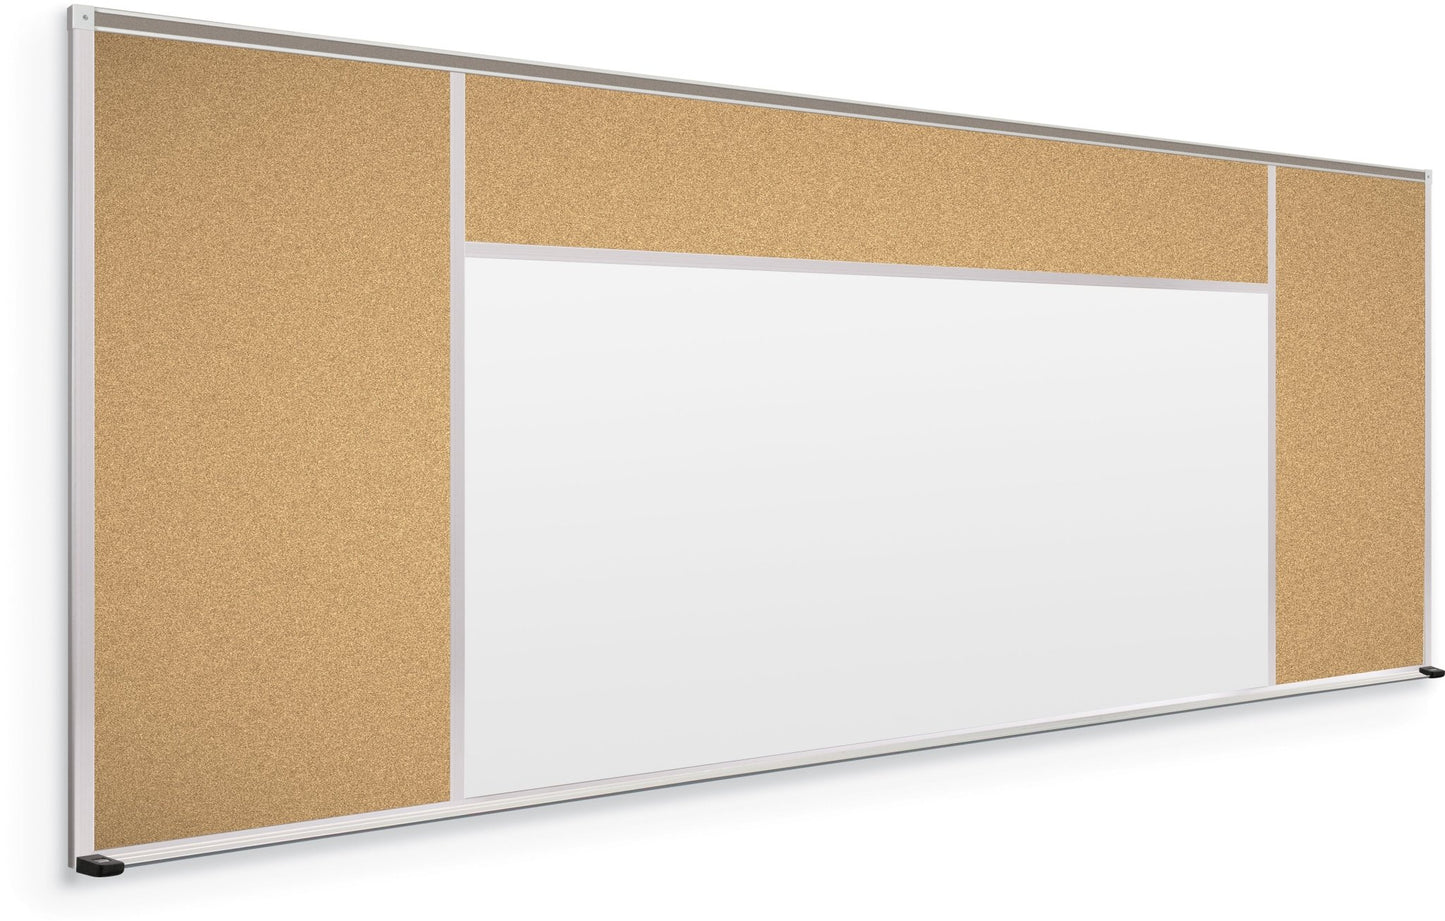 Mooreco Combination Board - Porcelain Steel Markerboard and Natural Cork Tackboard (Type H) - SchoolOutlet